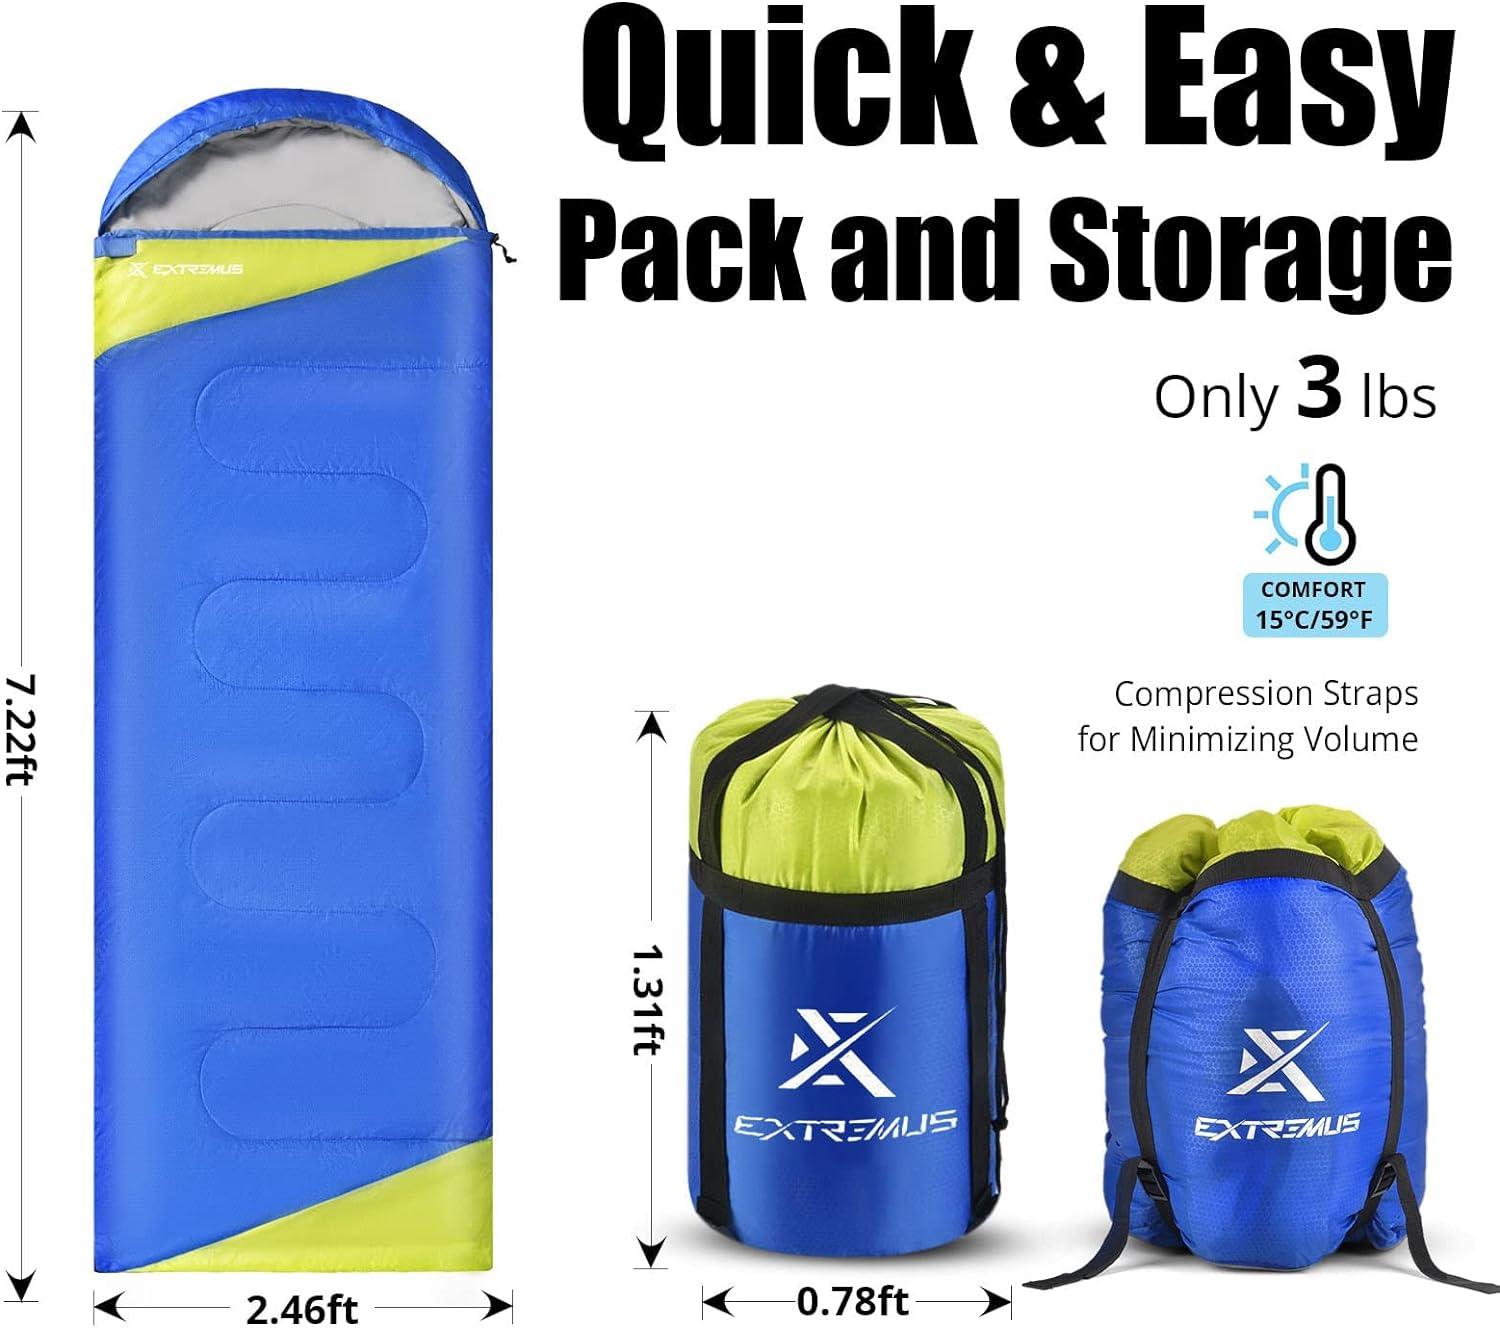 Extremus Rectangular Camping Sleeping Bag 3-Season Comfort Single/Double  Backpacking Sleeping Bags for Adults Lightweight water repellency Camping  Gear Stuff Sack With Compression Straps Included A: Single-Royal  Blue/Chartreuse